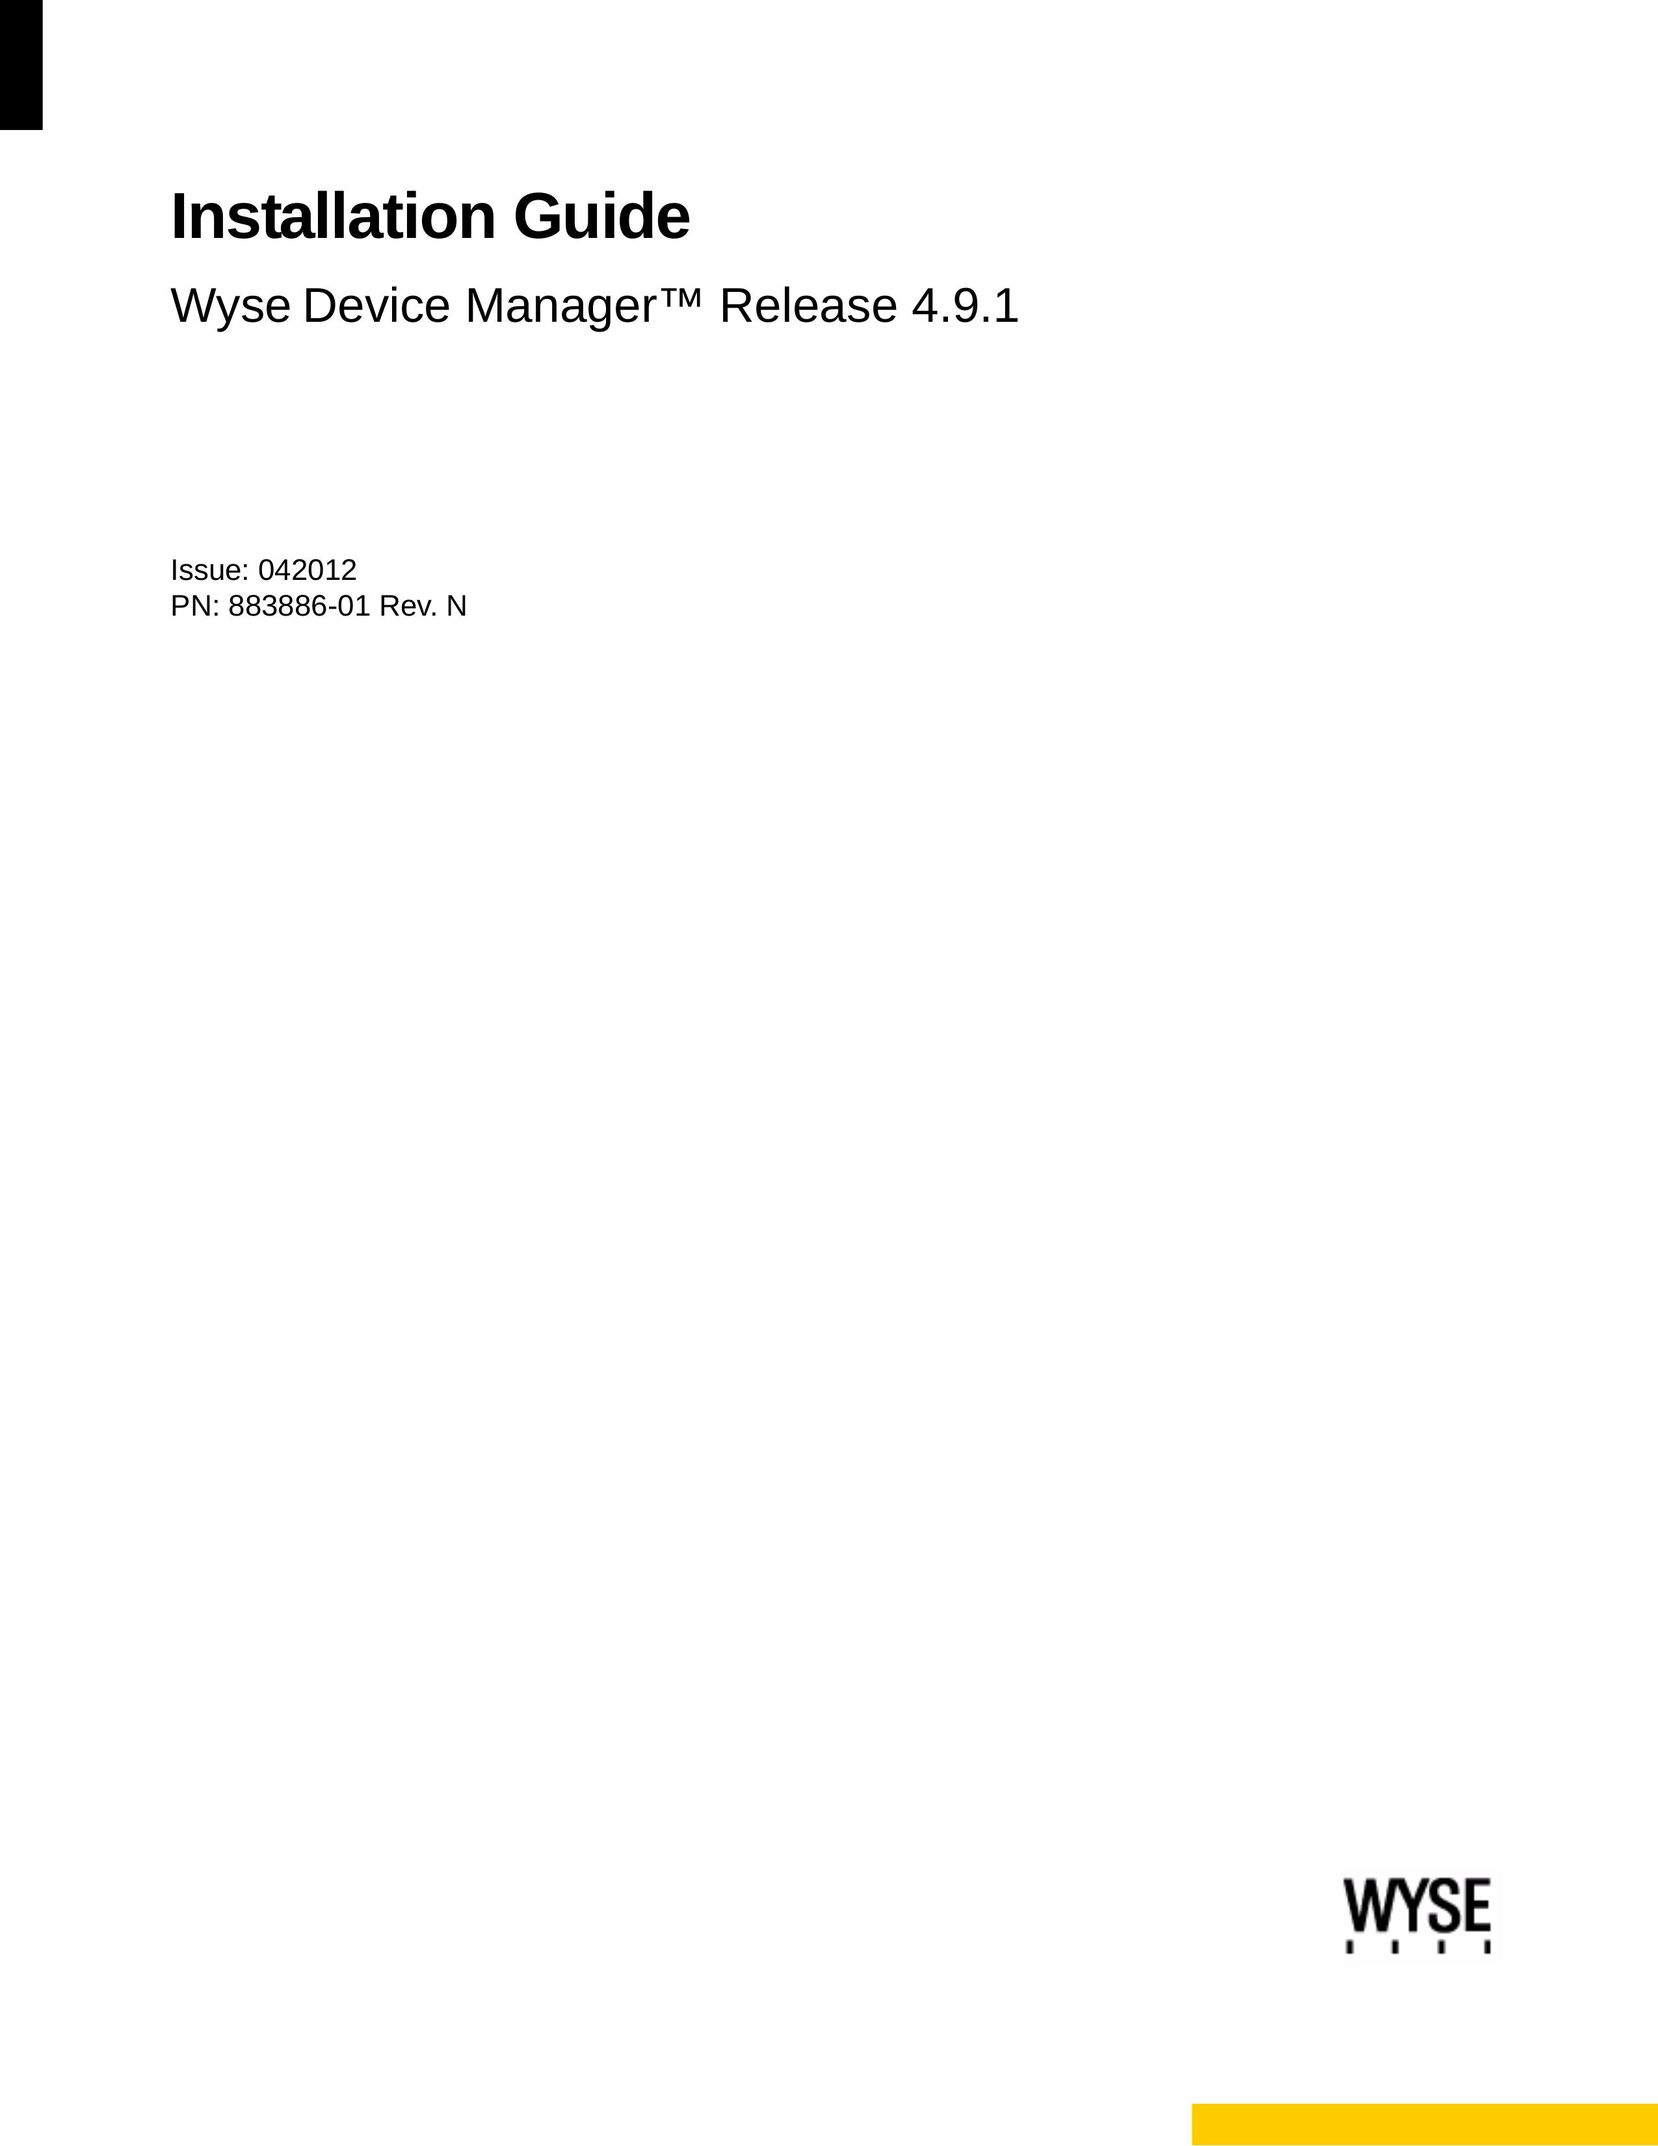 Wyse Technology 883886-01 Personal Computer User Manual